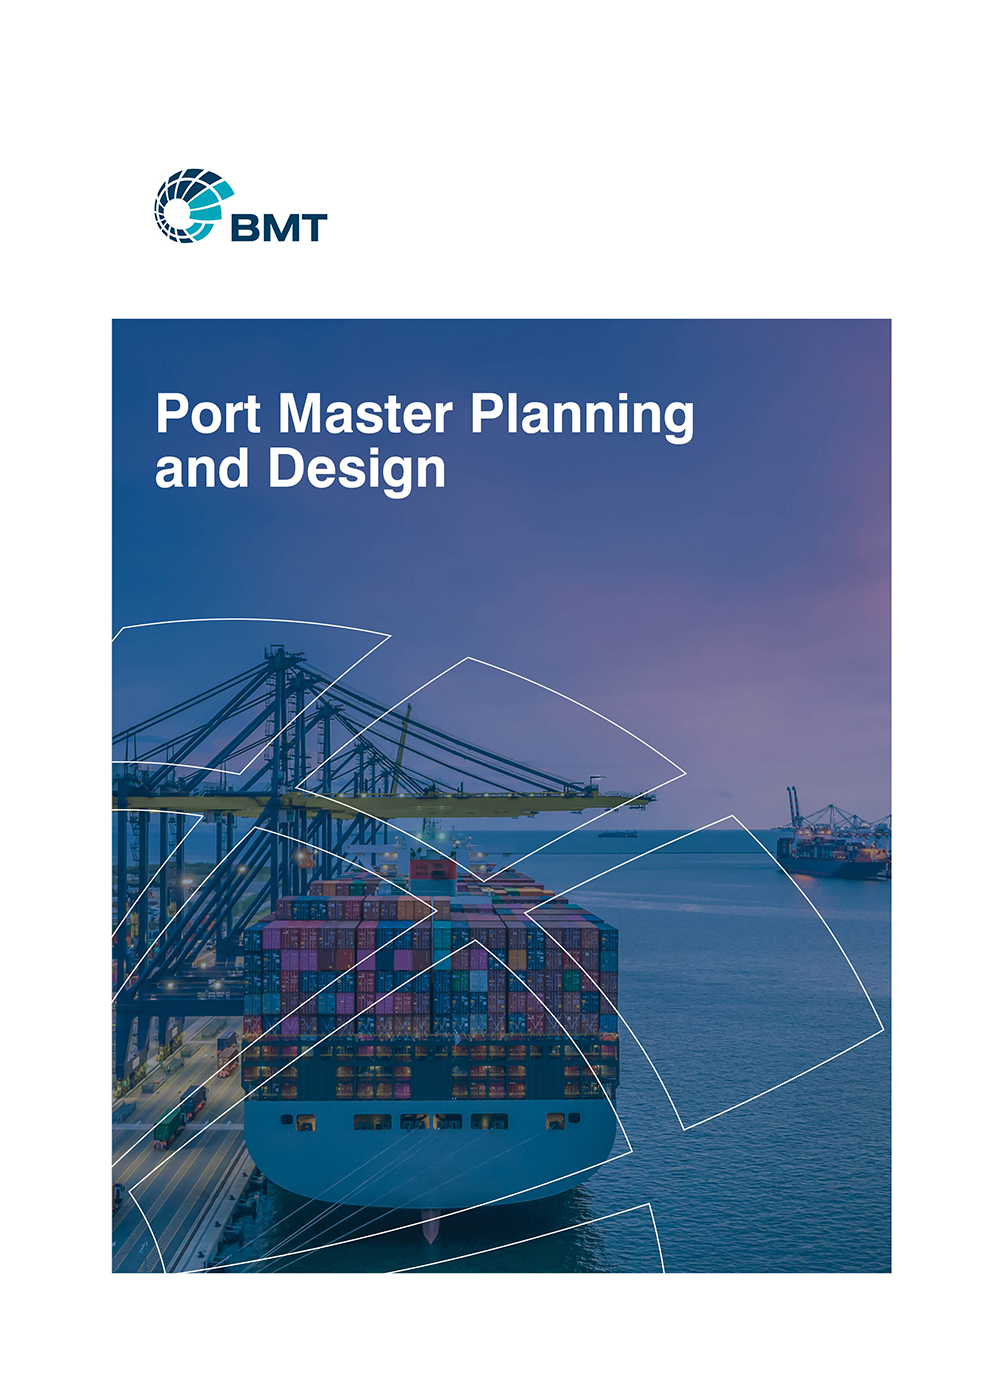 BMT's services for port master planning and design